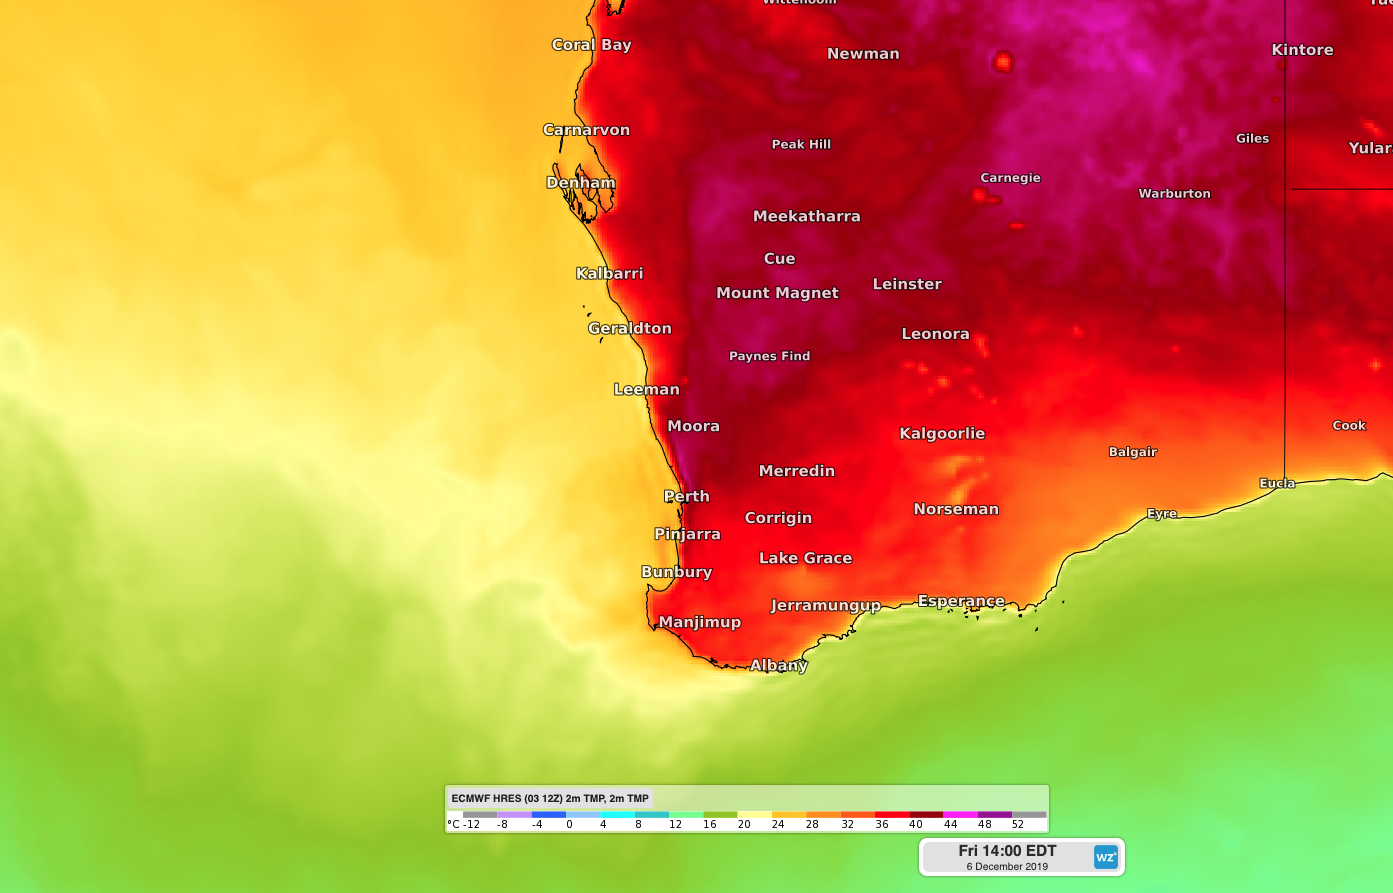 Hot start to summer in Perth